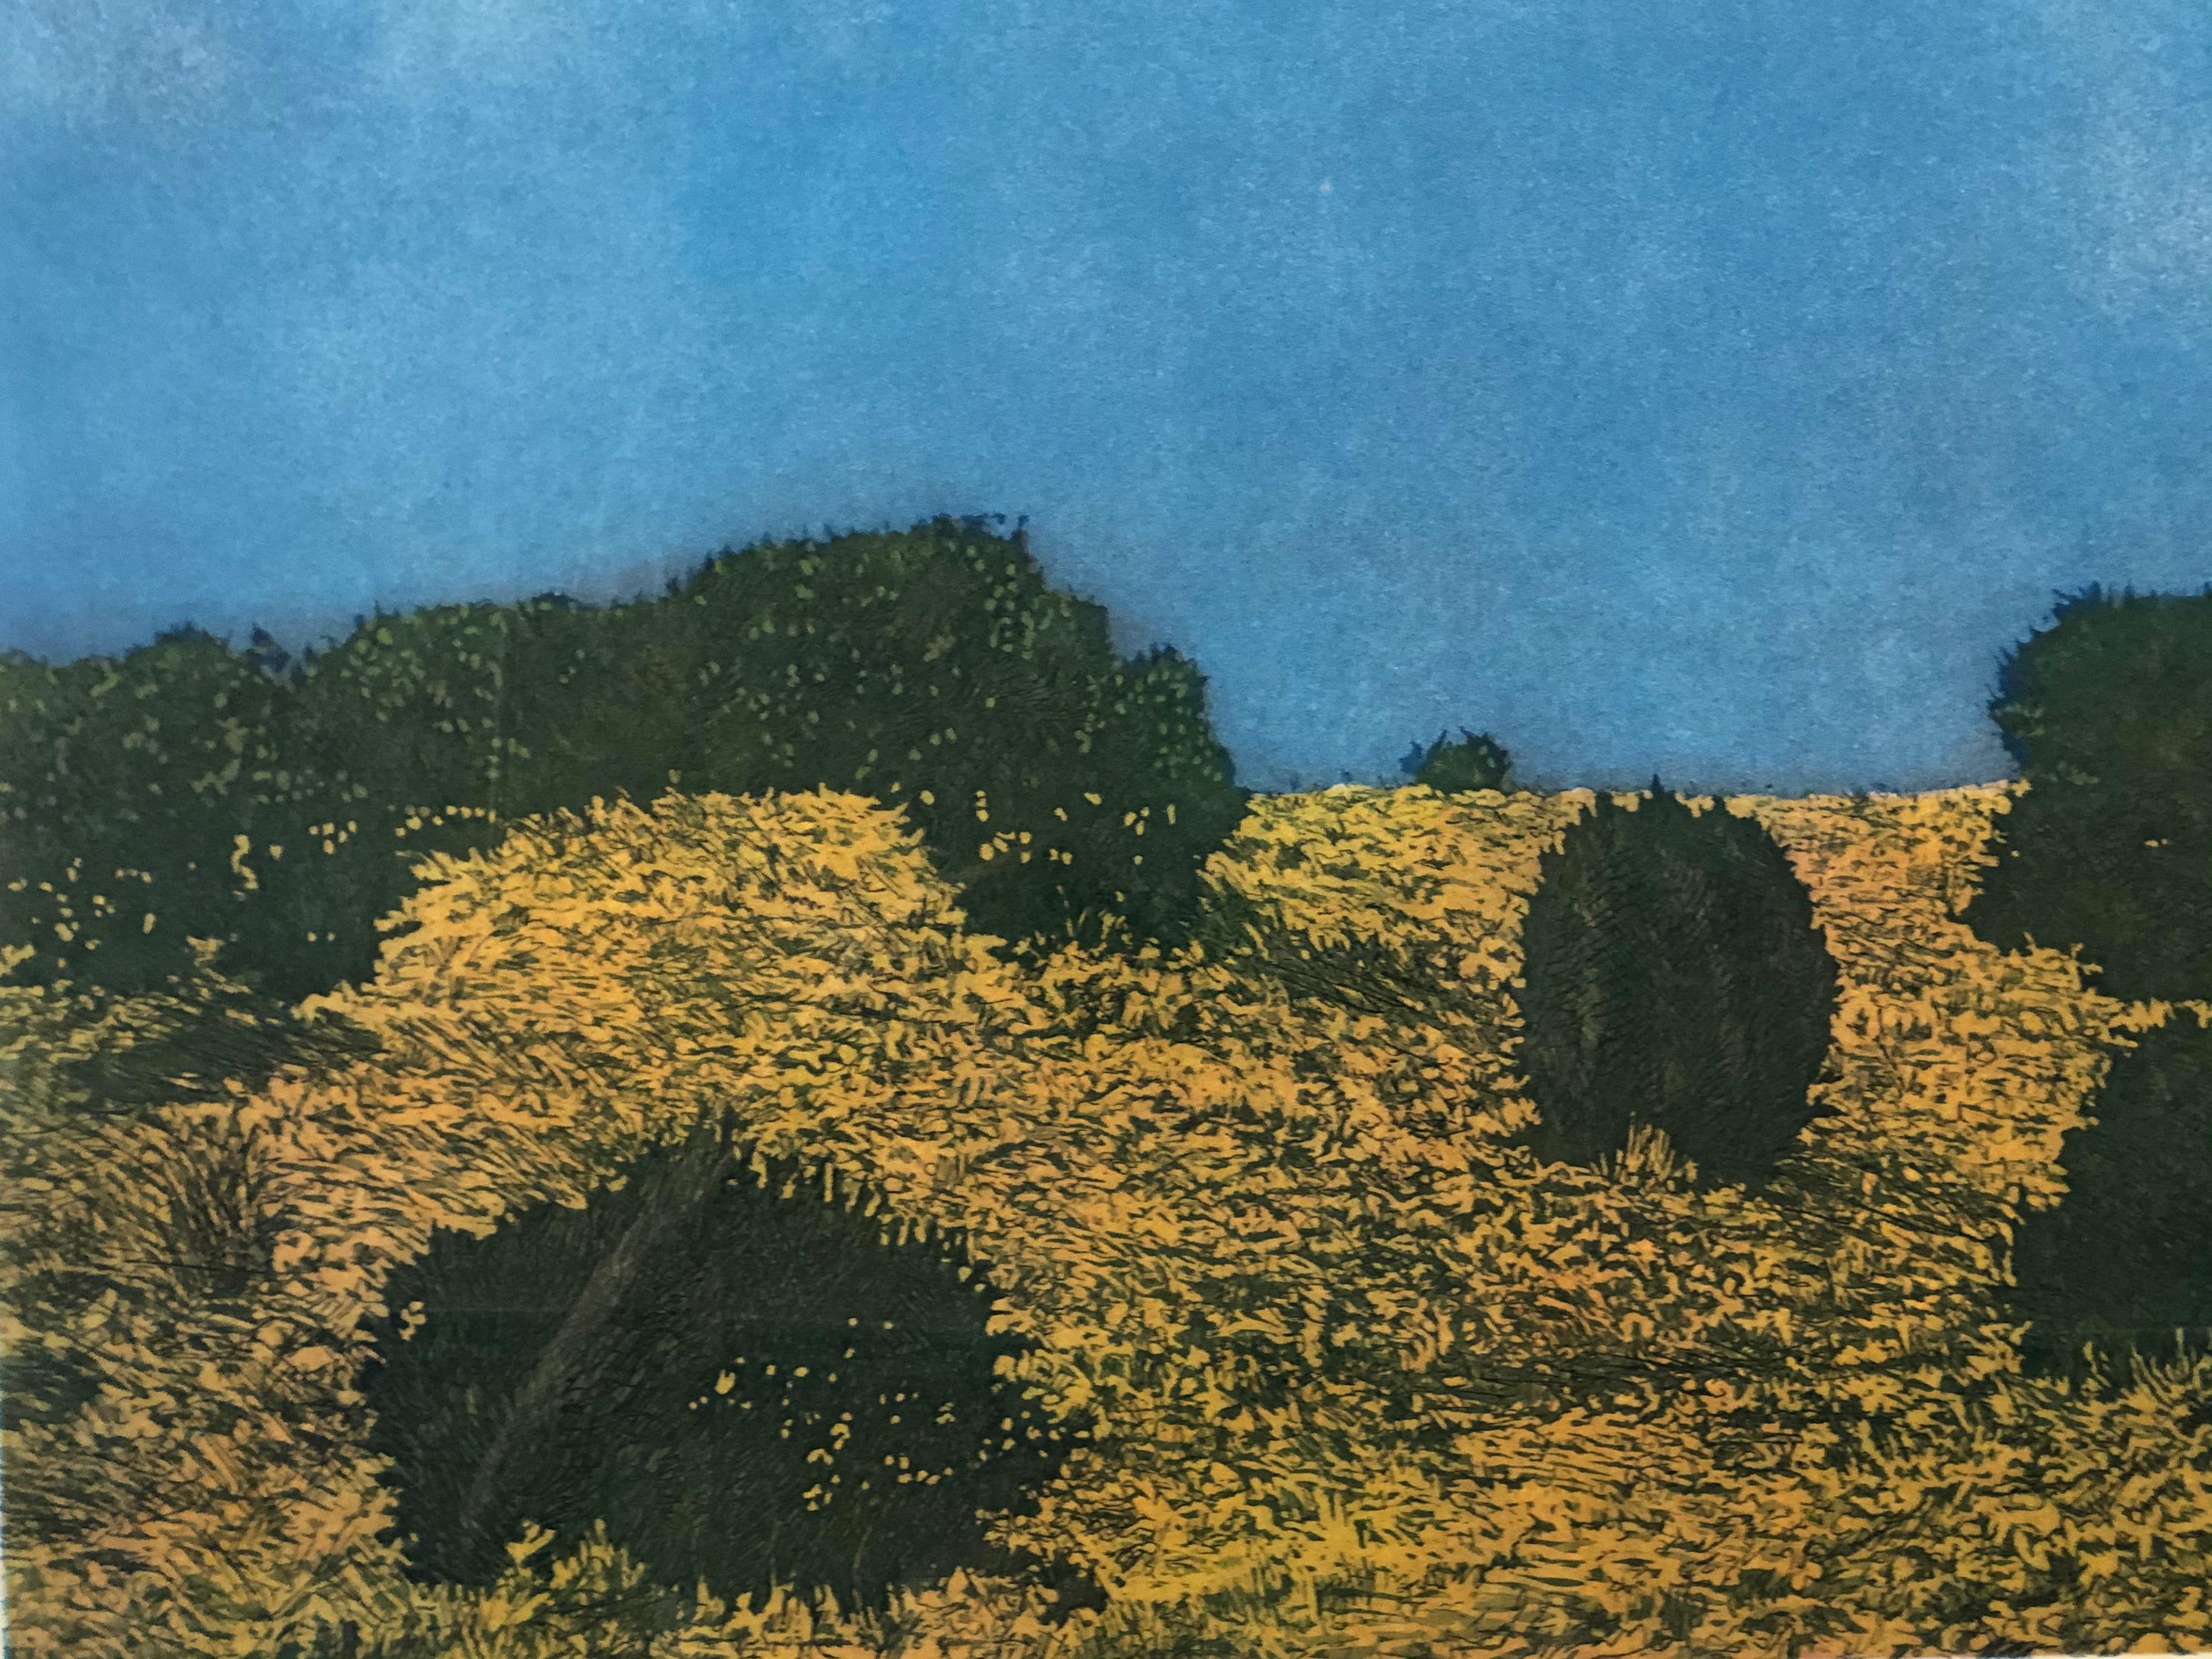 Cloudy Day Prairie II, by John Hogan, New Mexico Landscape, Color Etching, blues For Sale 3